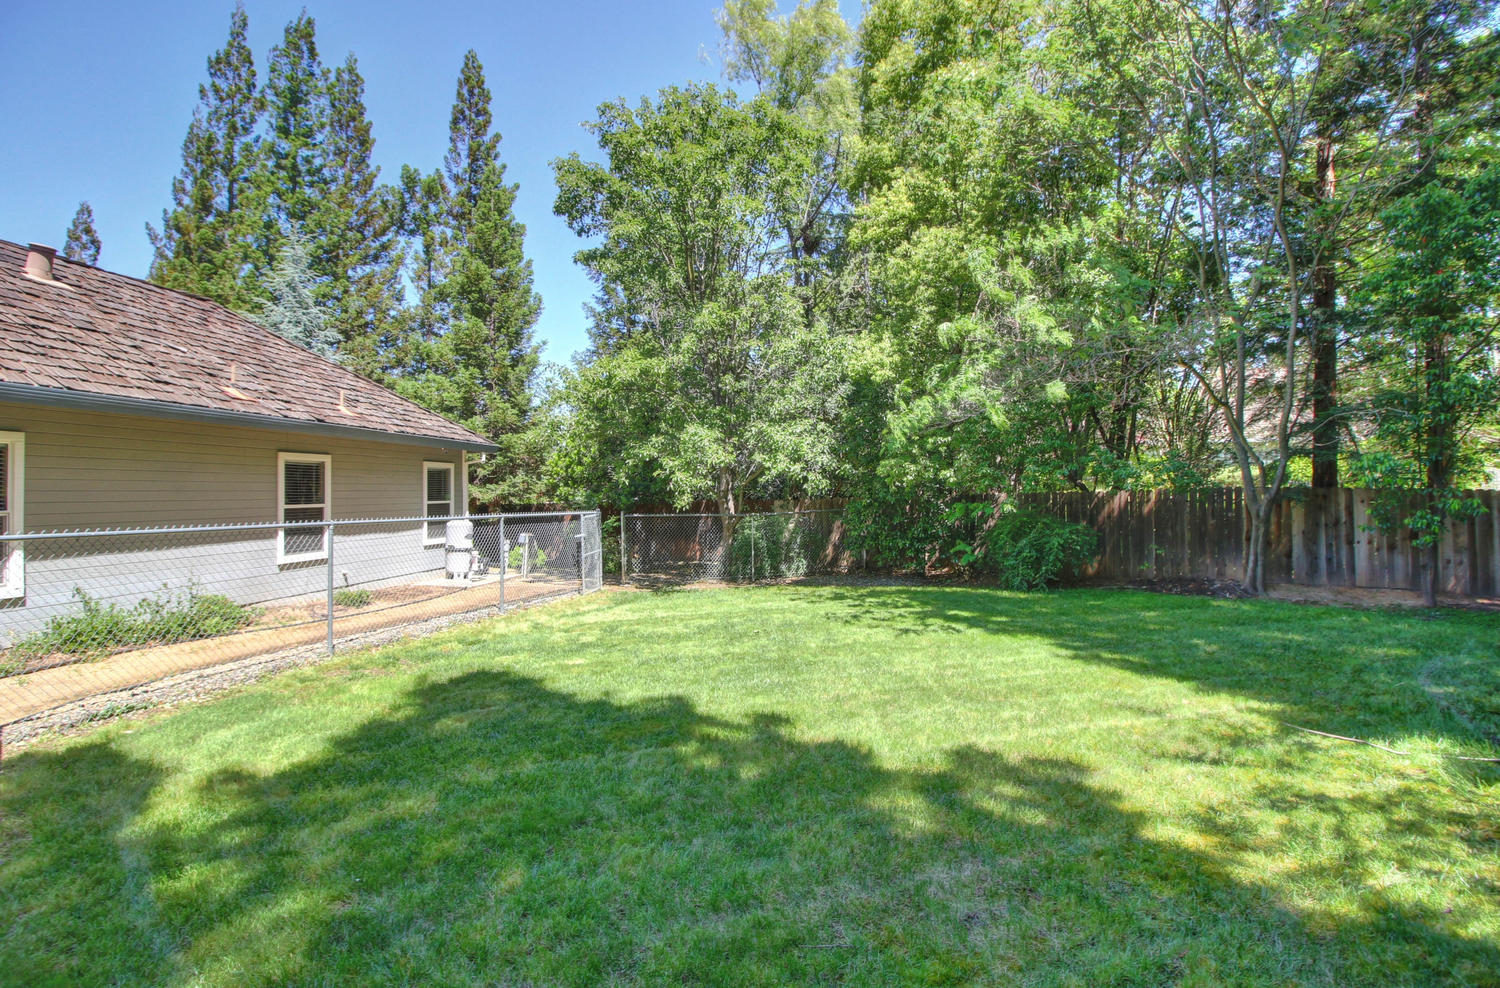 3594 Old Country Ct Roseville-large-041-41-41-1500x988-72dpi